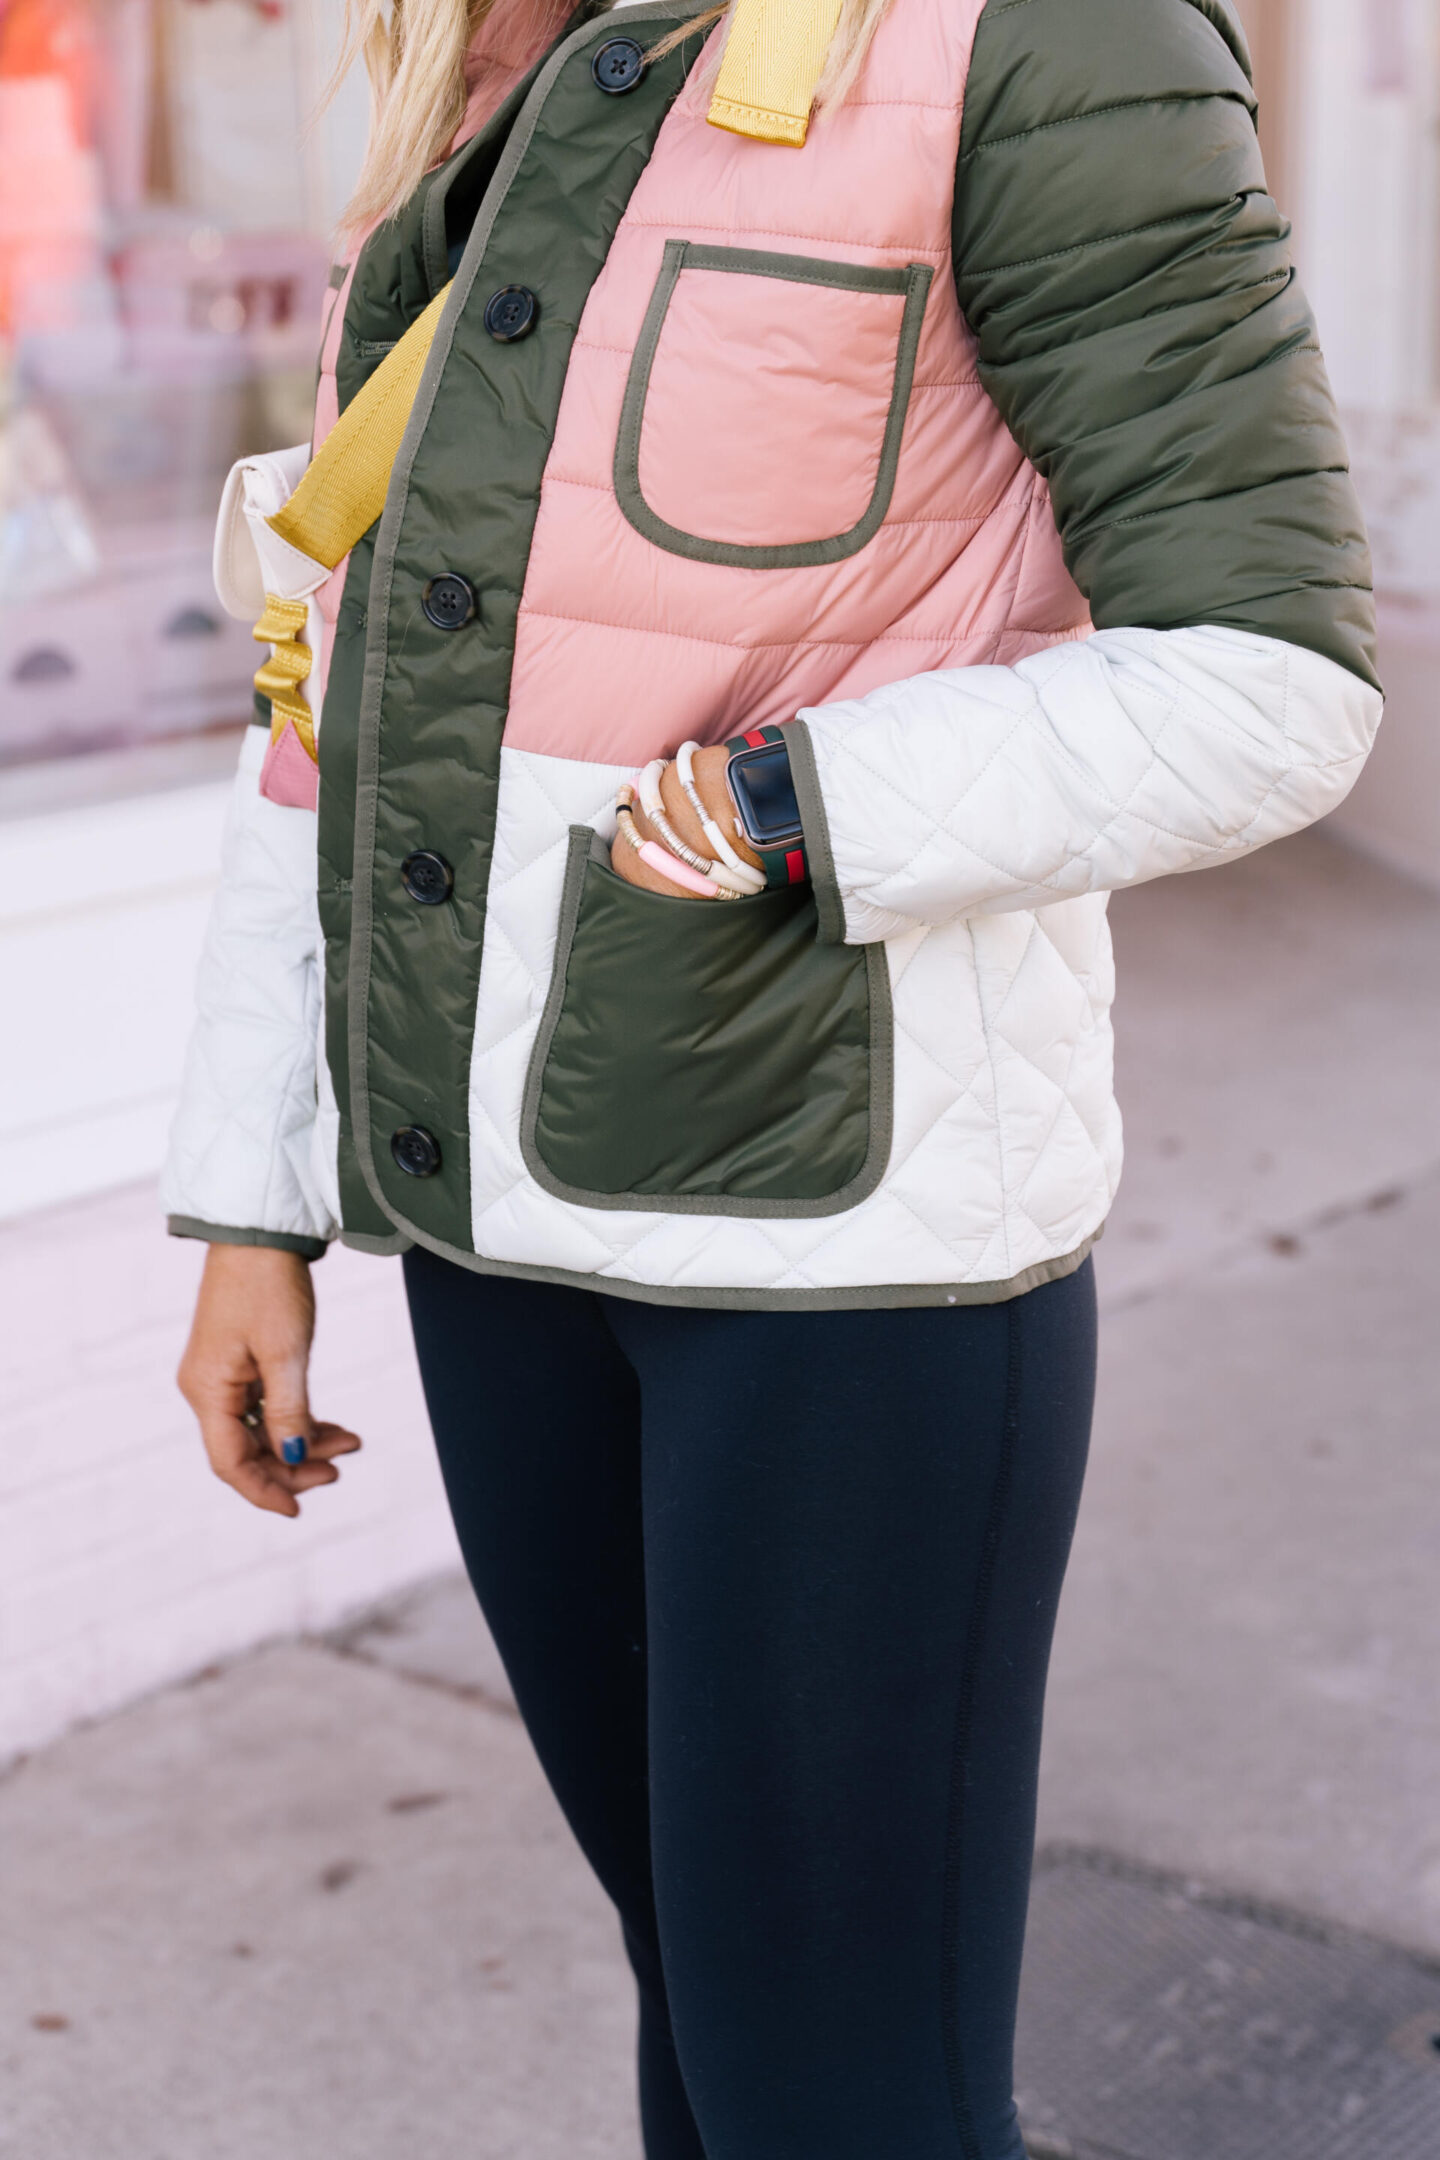 jcrew athleisure for her featured by top Nashville fashion blogger, Hello Happiness.